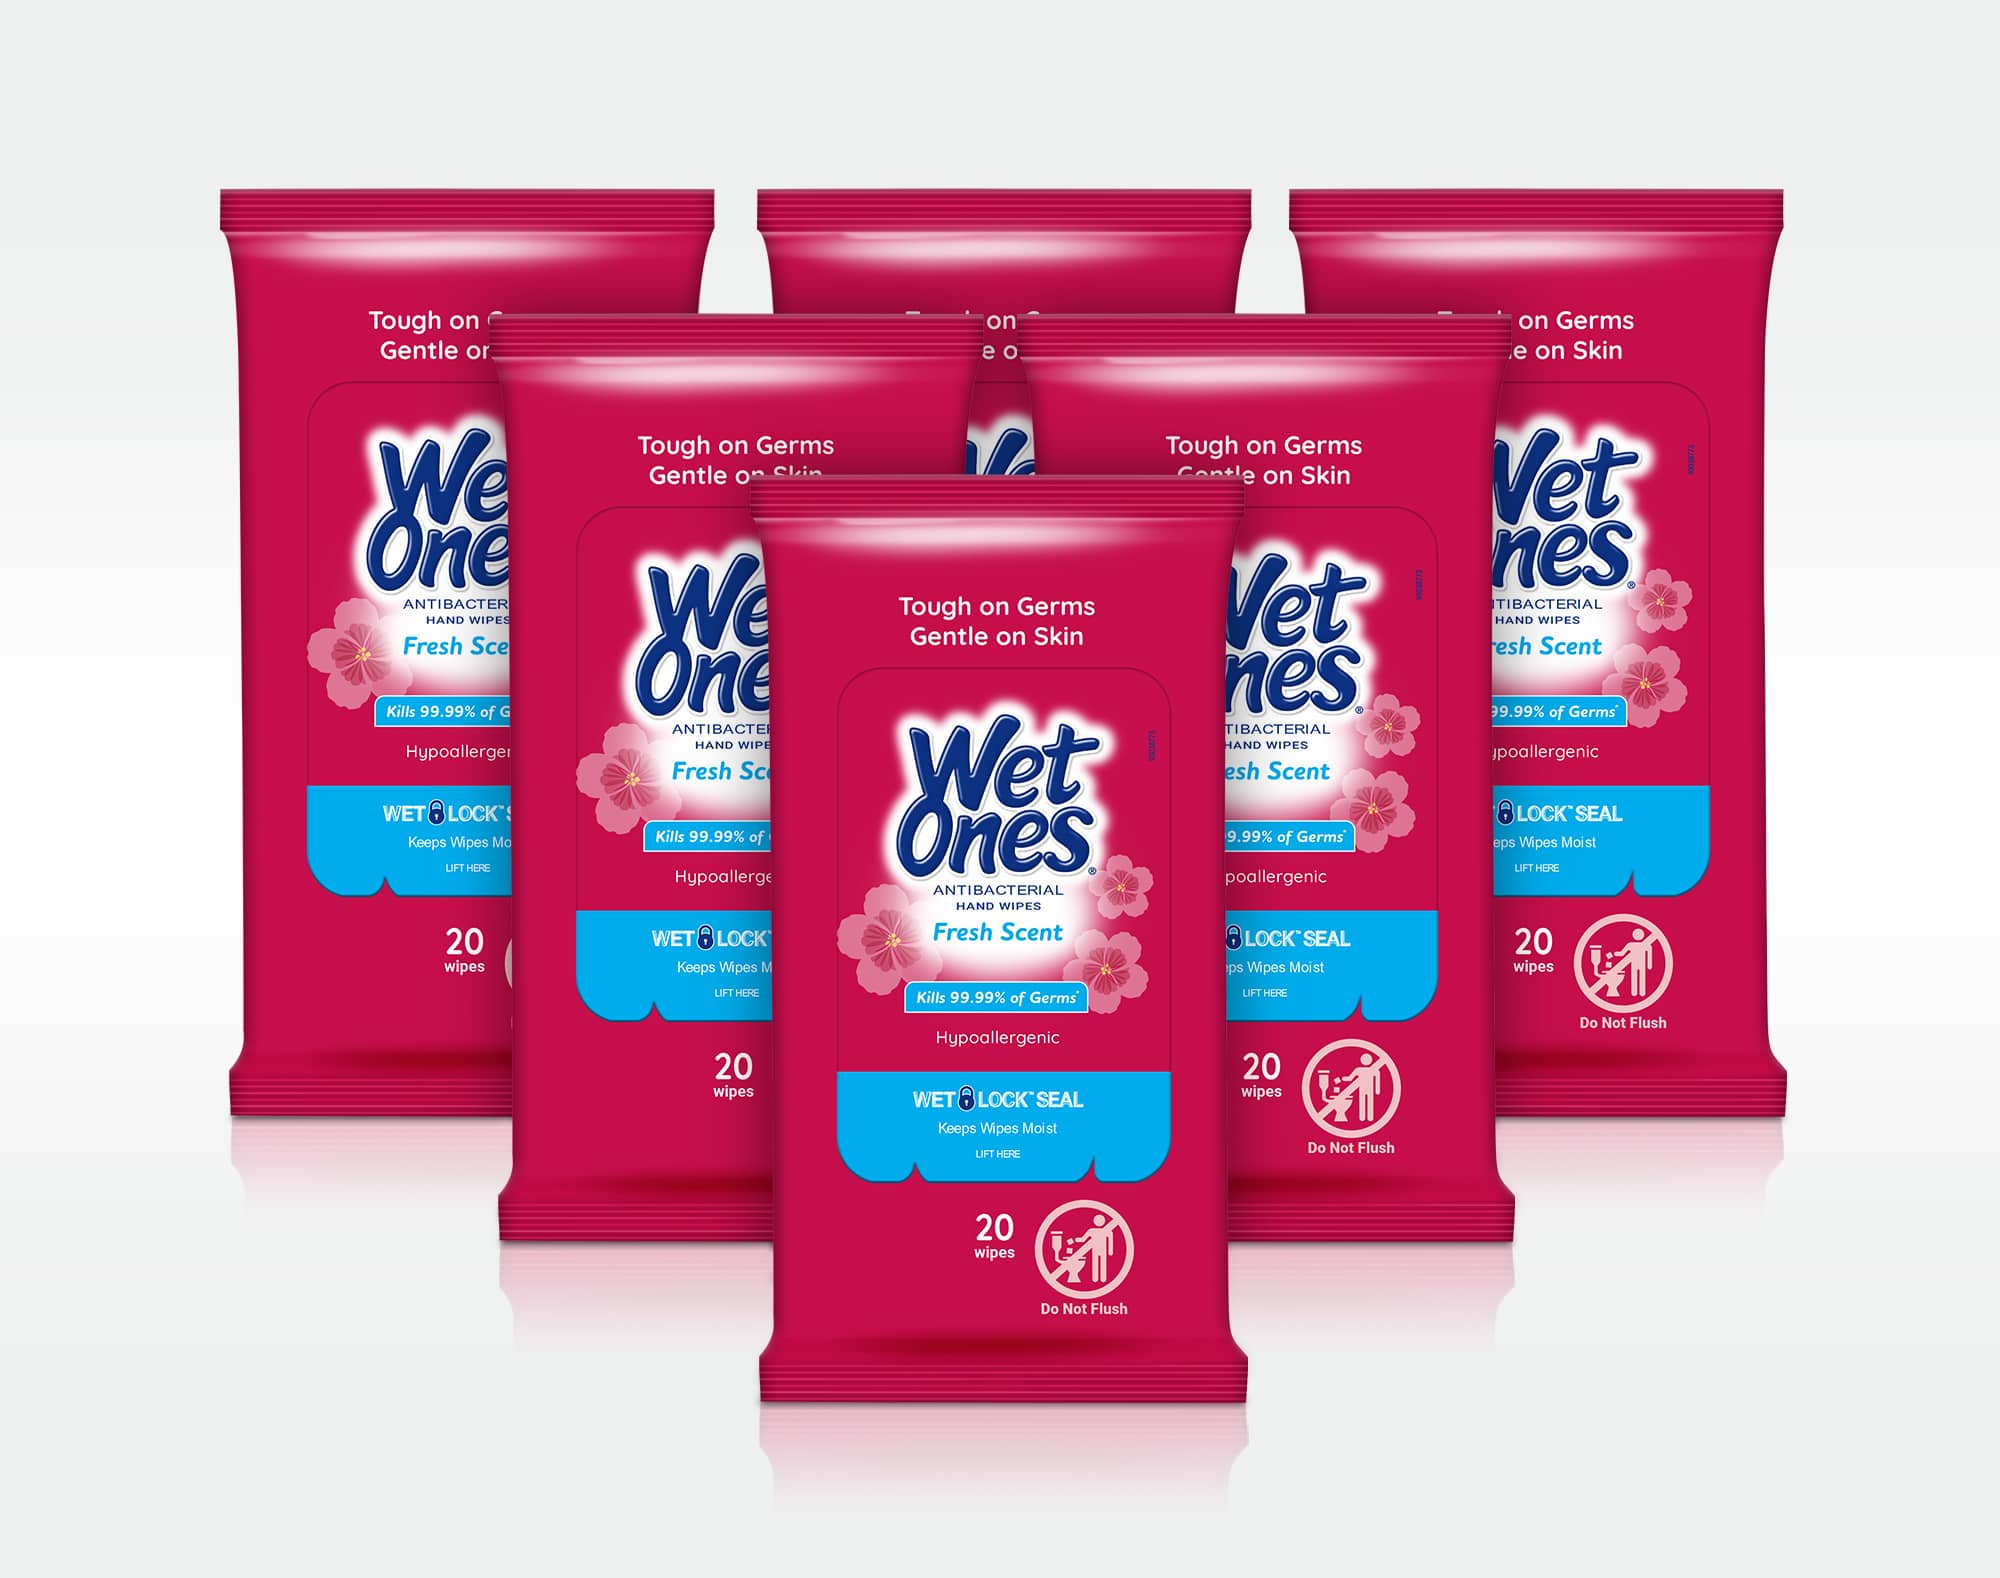 Wet Ones Antibacterial Hand Wipes Singles, Fresh Scent, Individually Wrapped 24 Ct. (6 Pack)